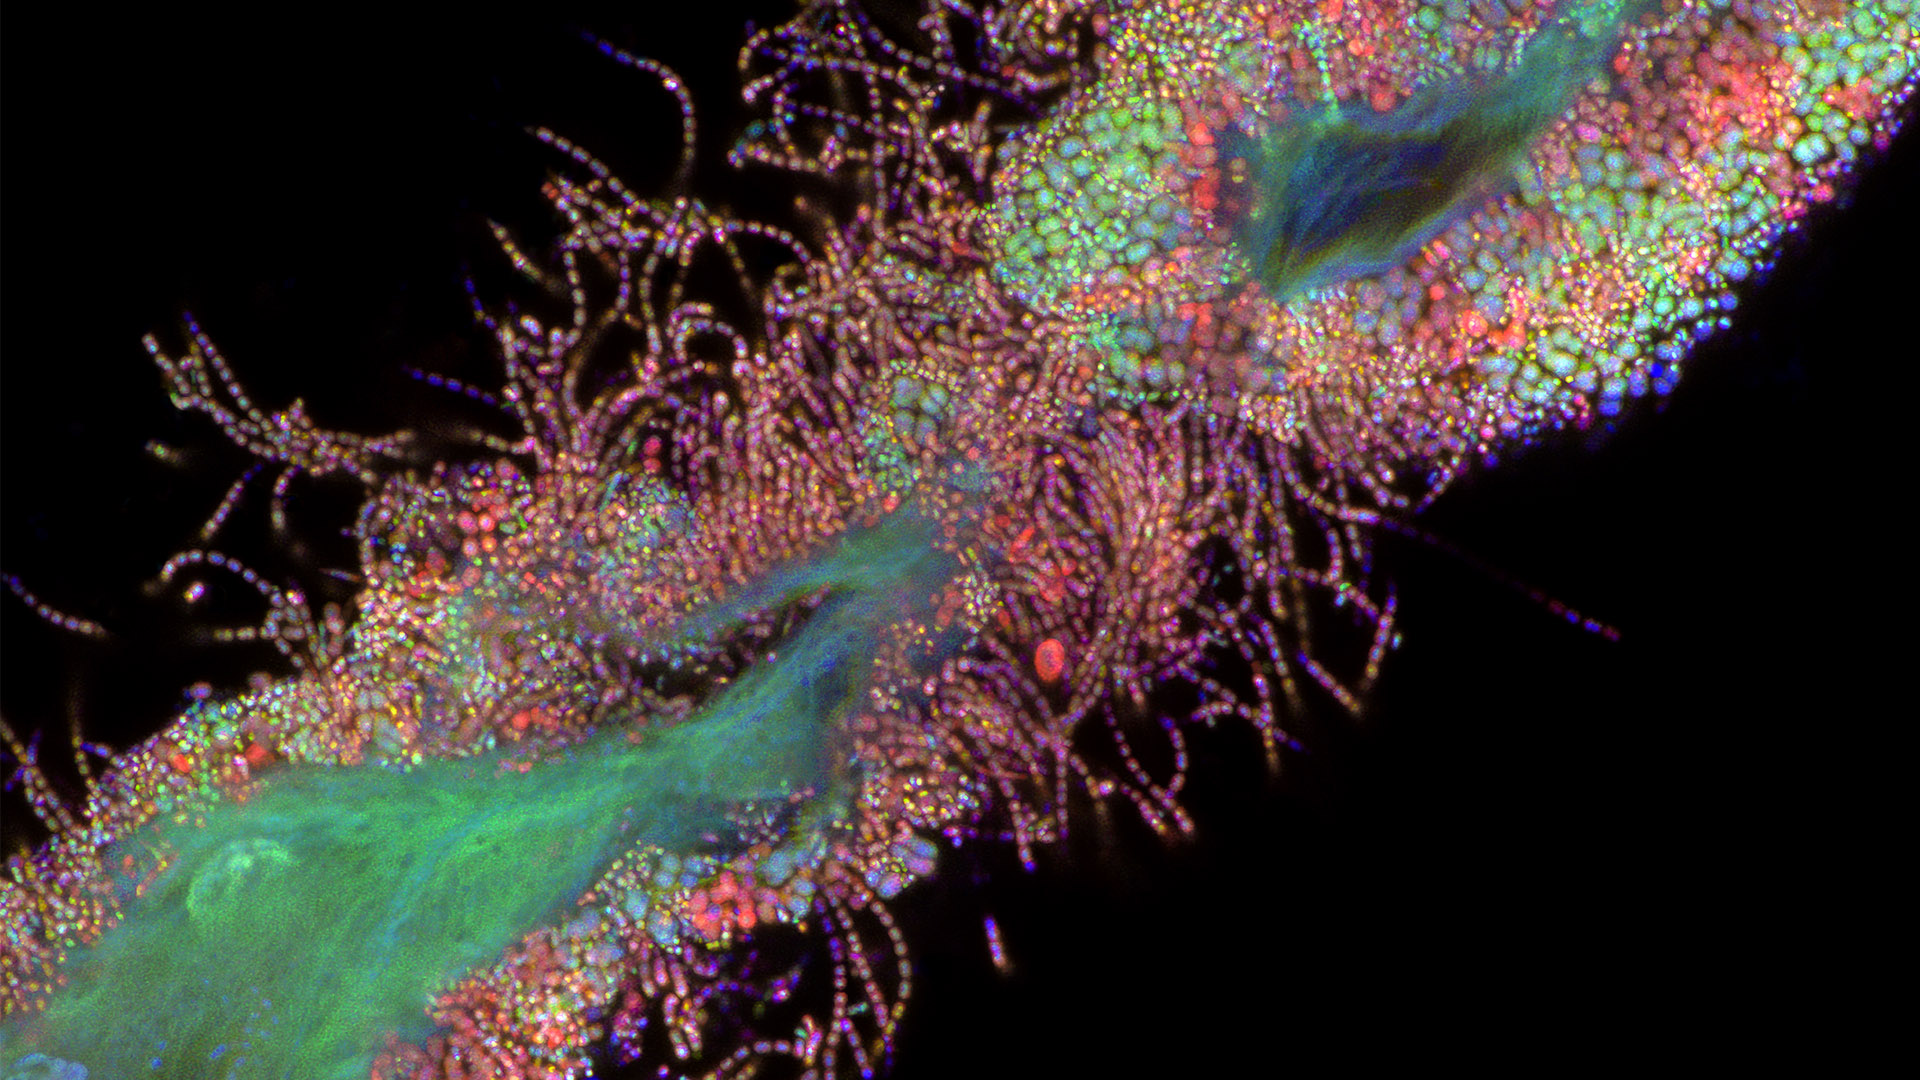 Winning image in the category of Life Sciences: "Bacteria bound to epithelial cells of the human tongue", acquired with ZEISS LSM 900 with Airyscan. Courtesy: T. deCarvalho, University of Maryland, Baltimore, USA